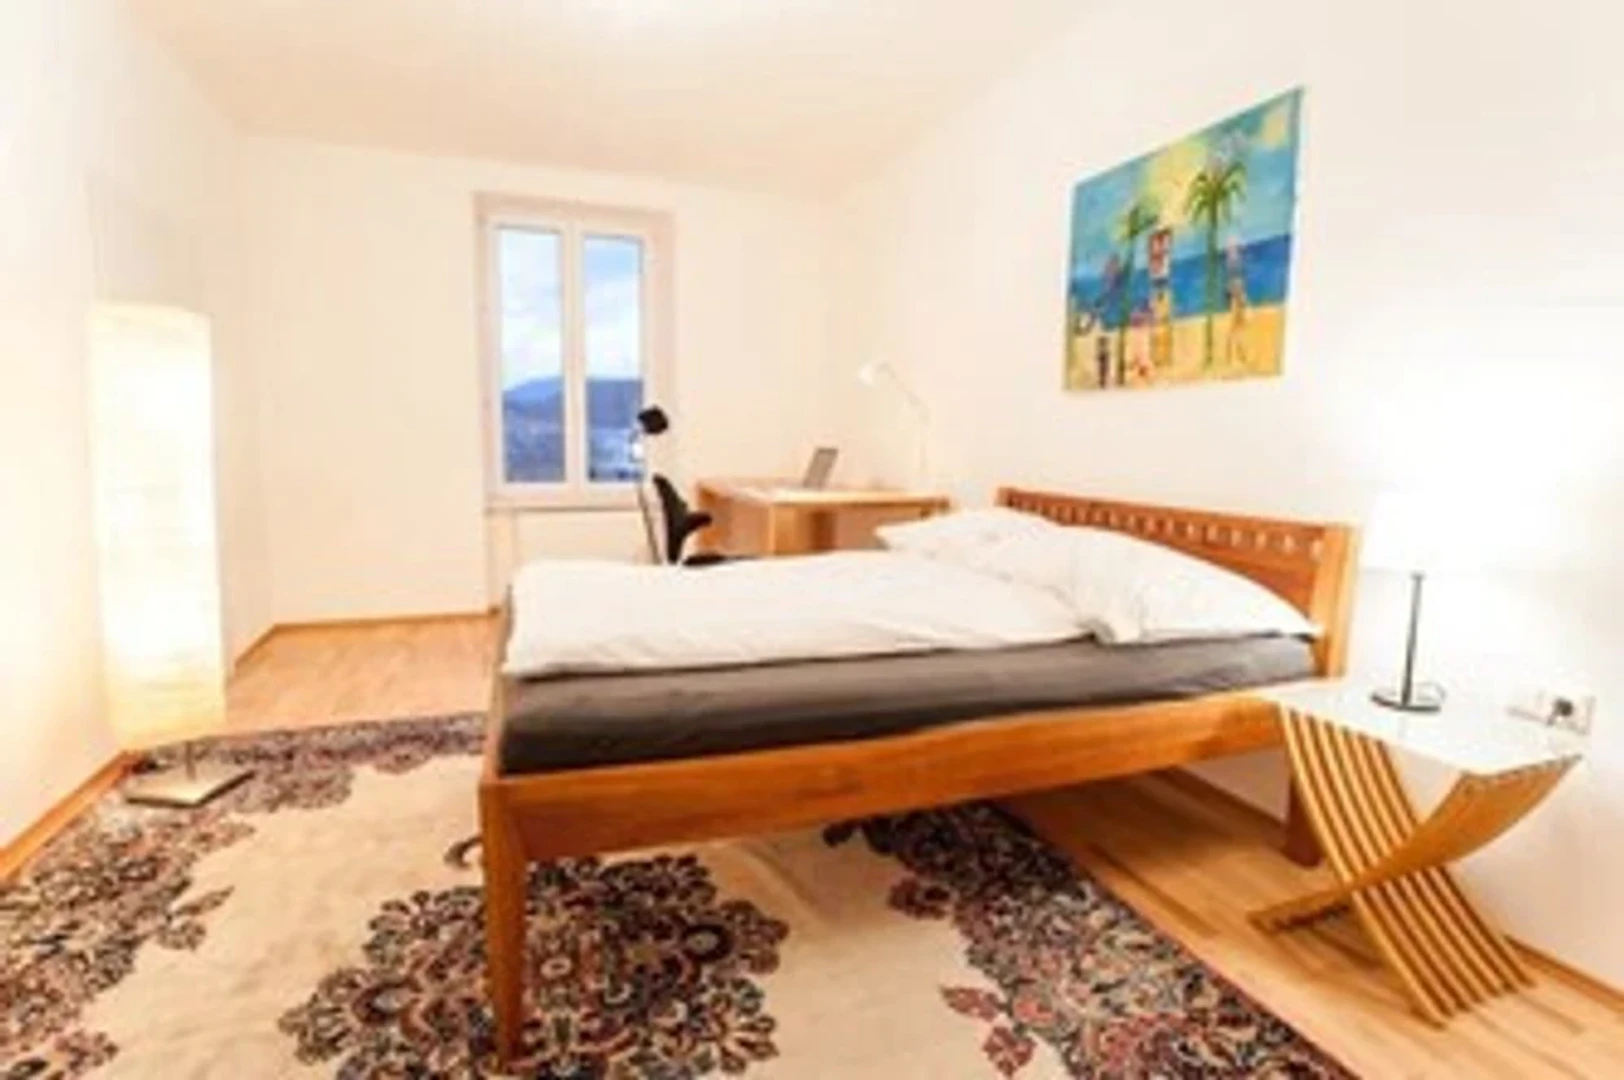 Accommodation with 3 bedrooms in Graz